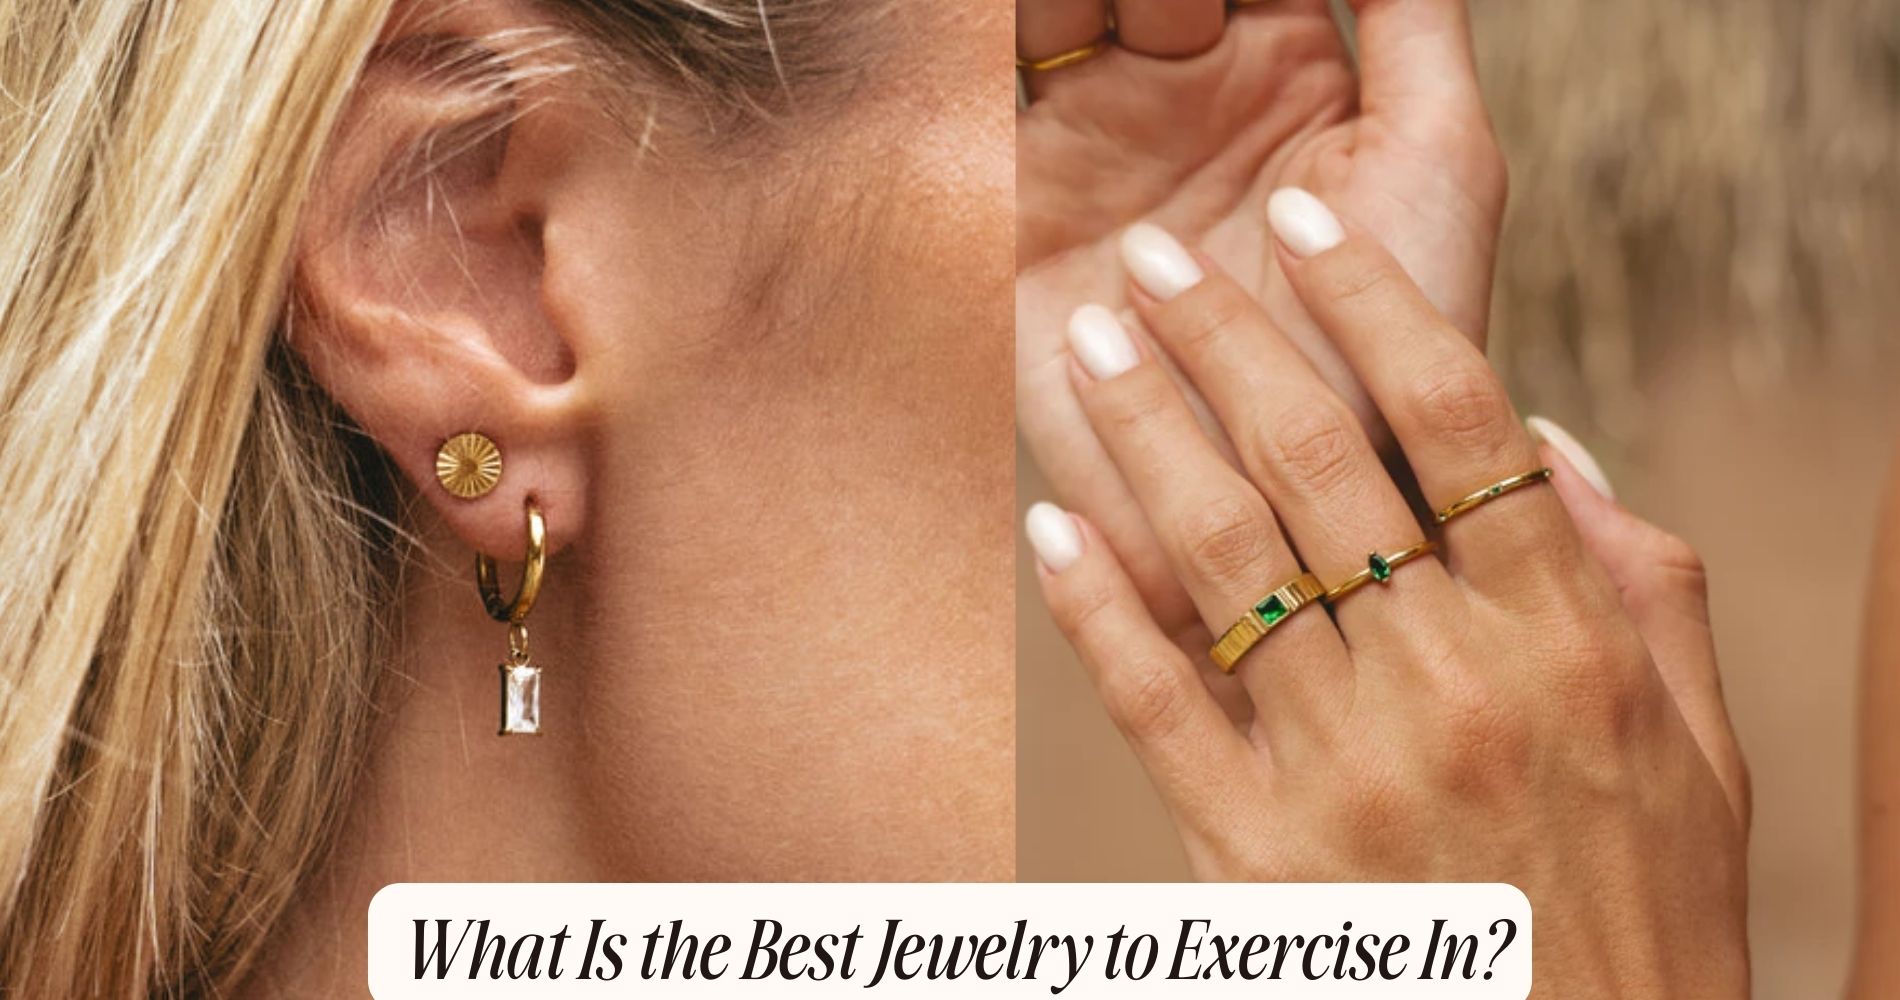 What is the best jewelry to exercise in?